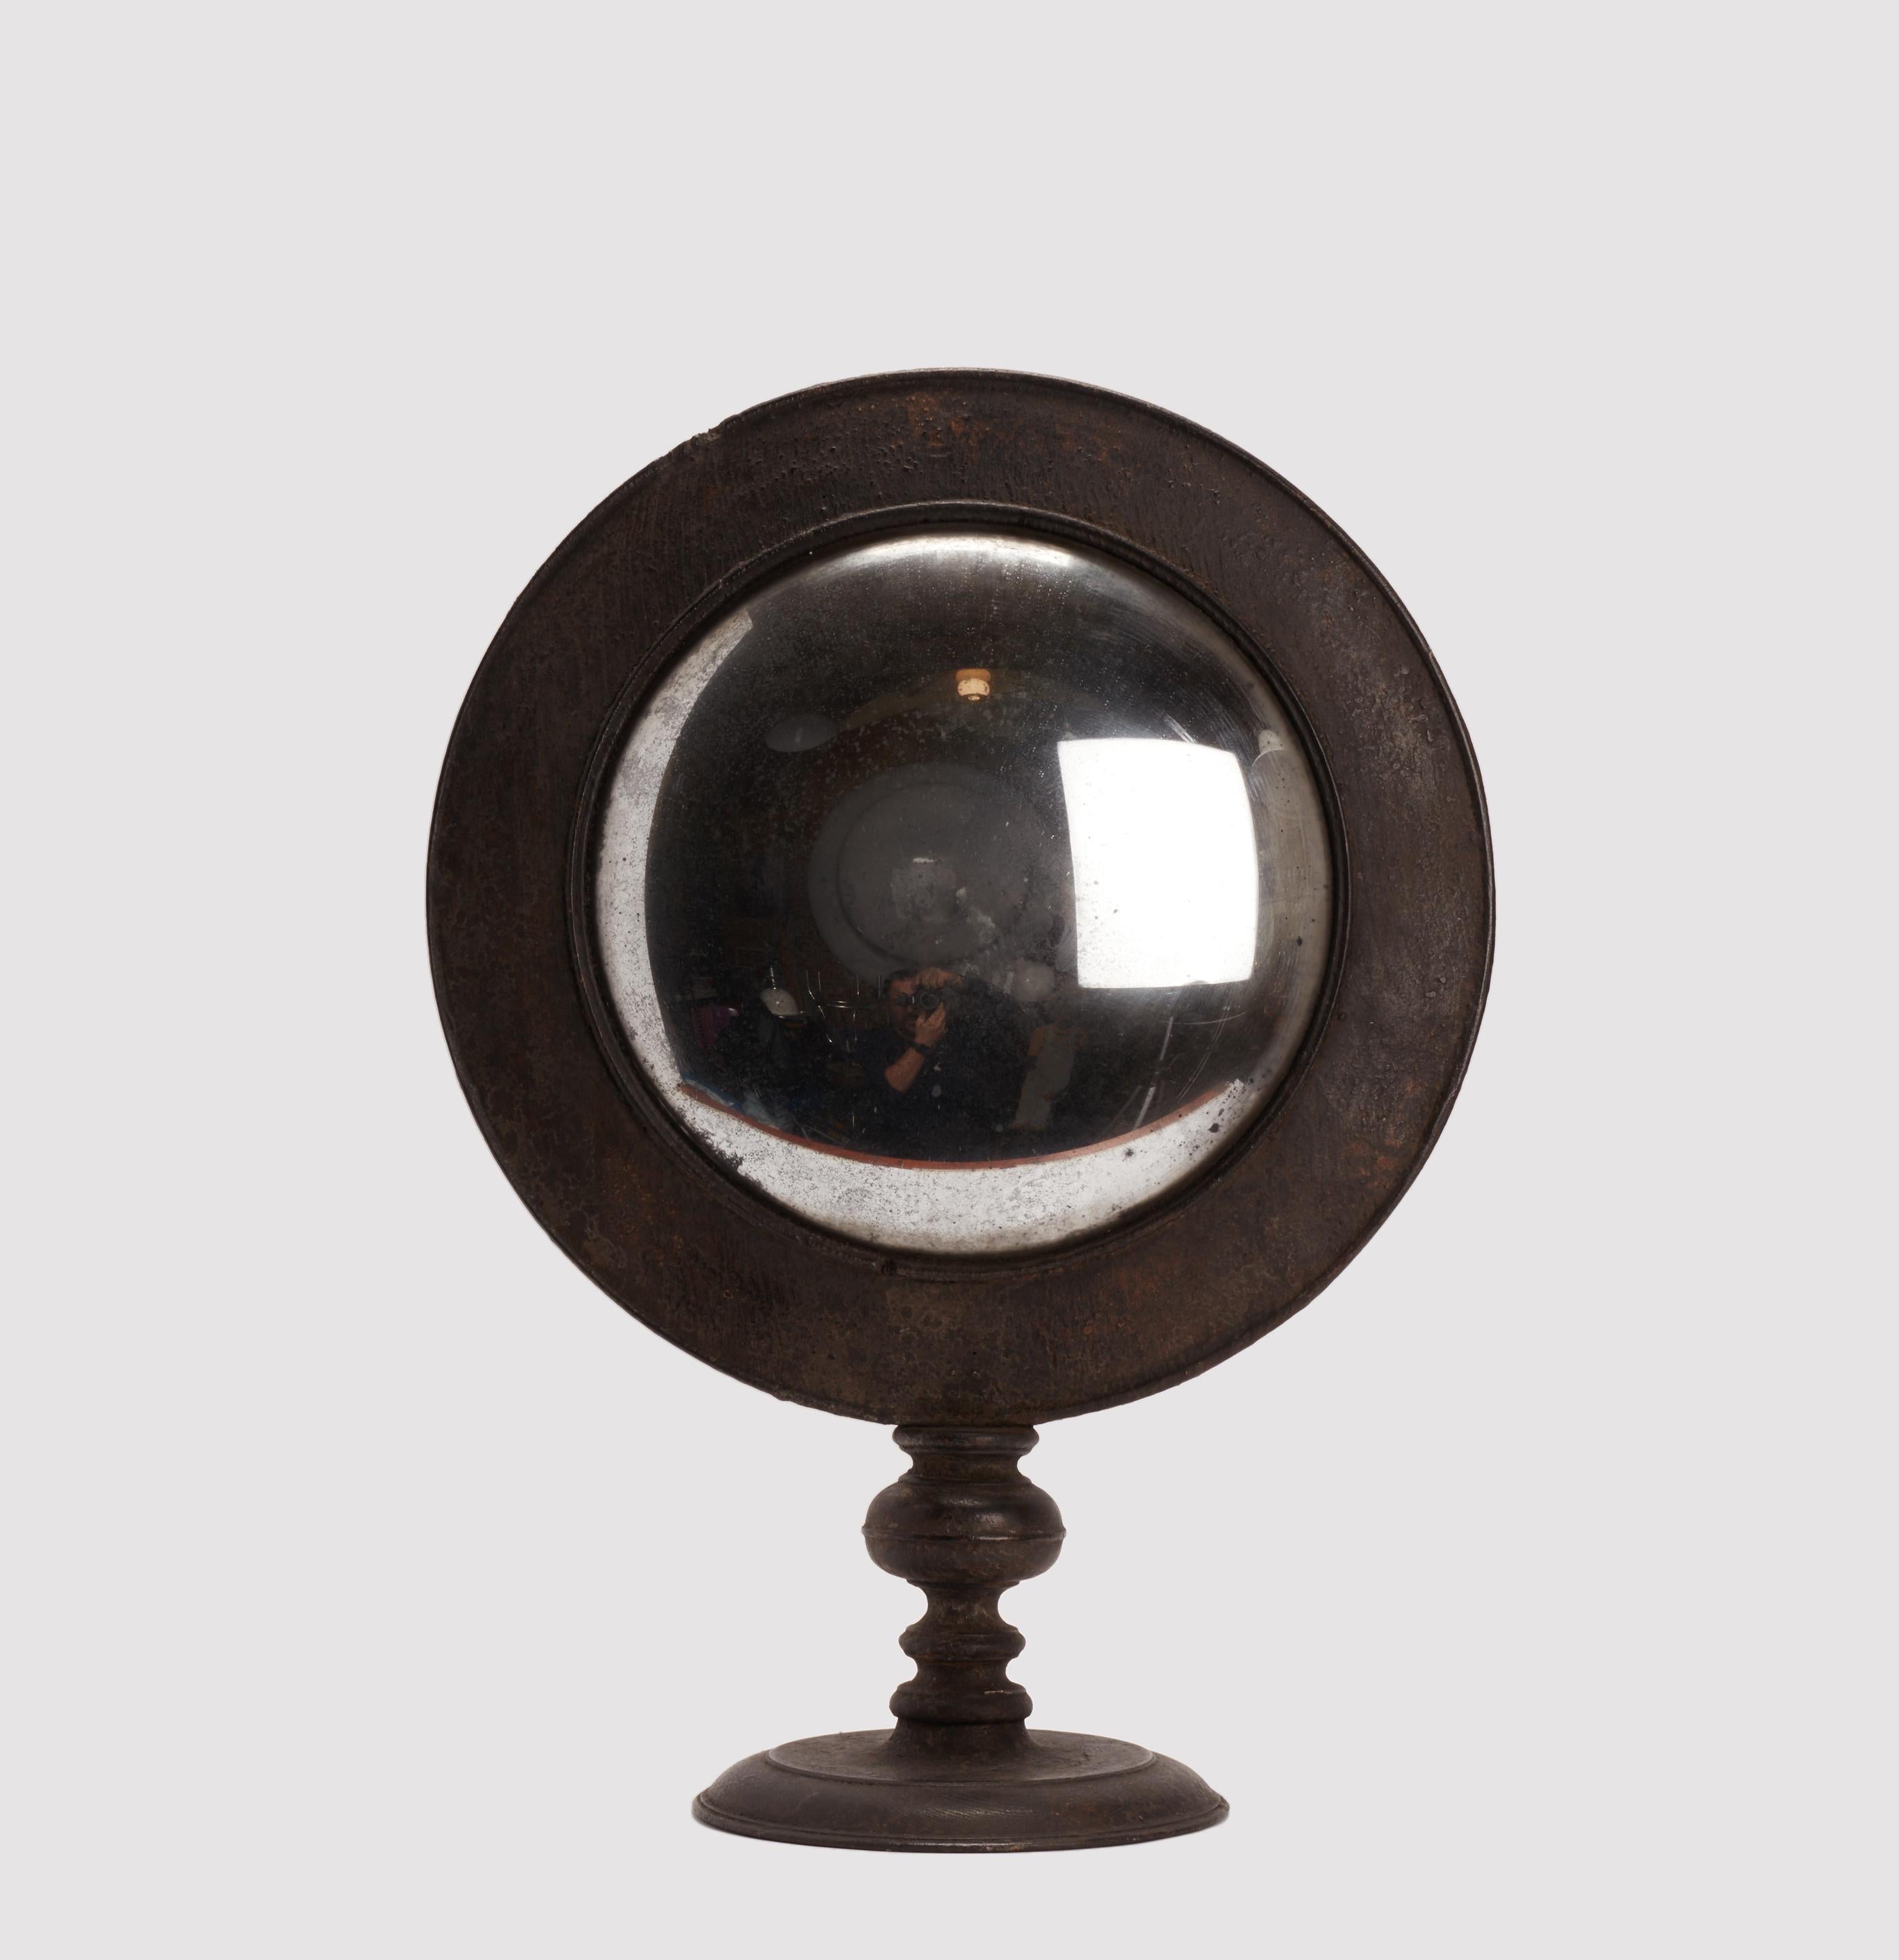 A large Wunderkammer convex round table mirror with black wooden frame mounted over a black round wooden base.